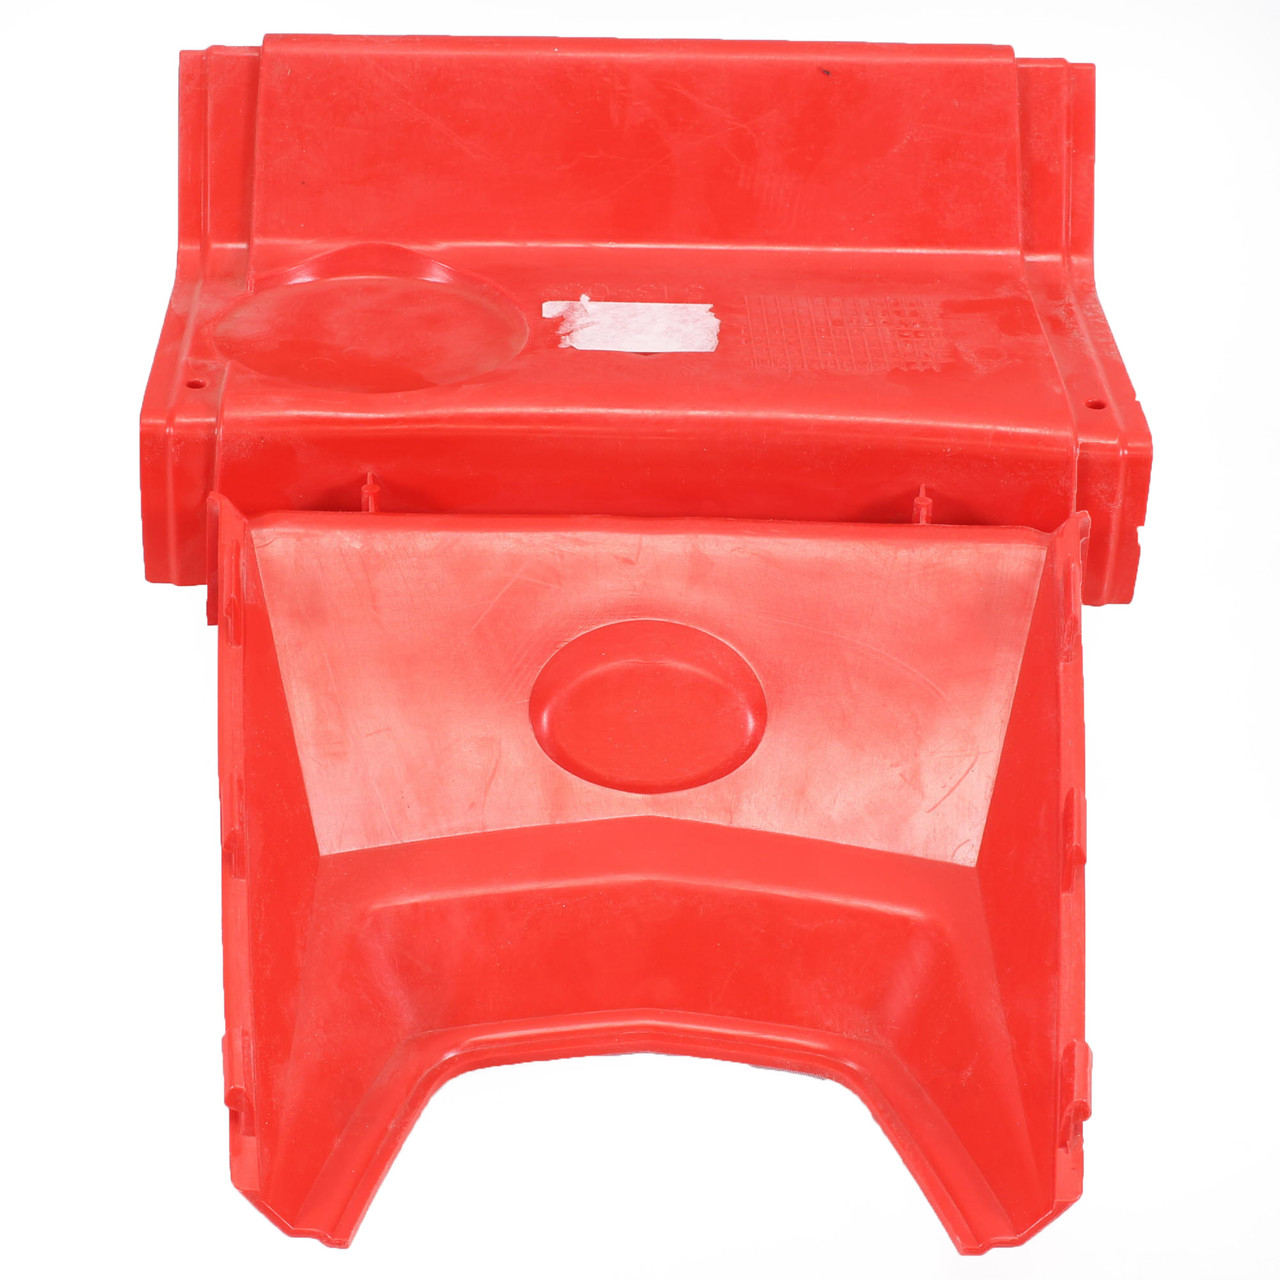 Polaris New OEM Indy Red Front Cover Sportsman 450 / 500 / 570 / 800 5439069-293